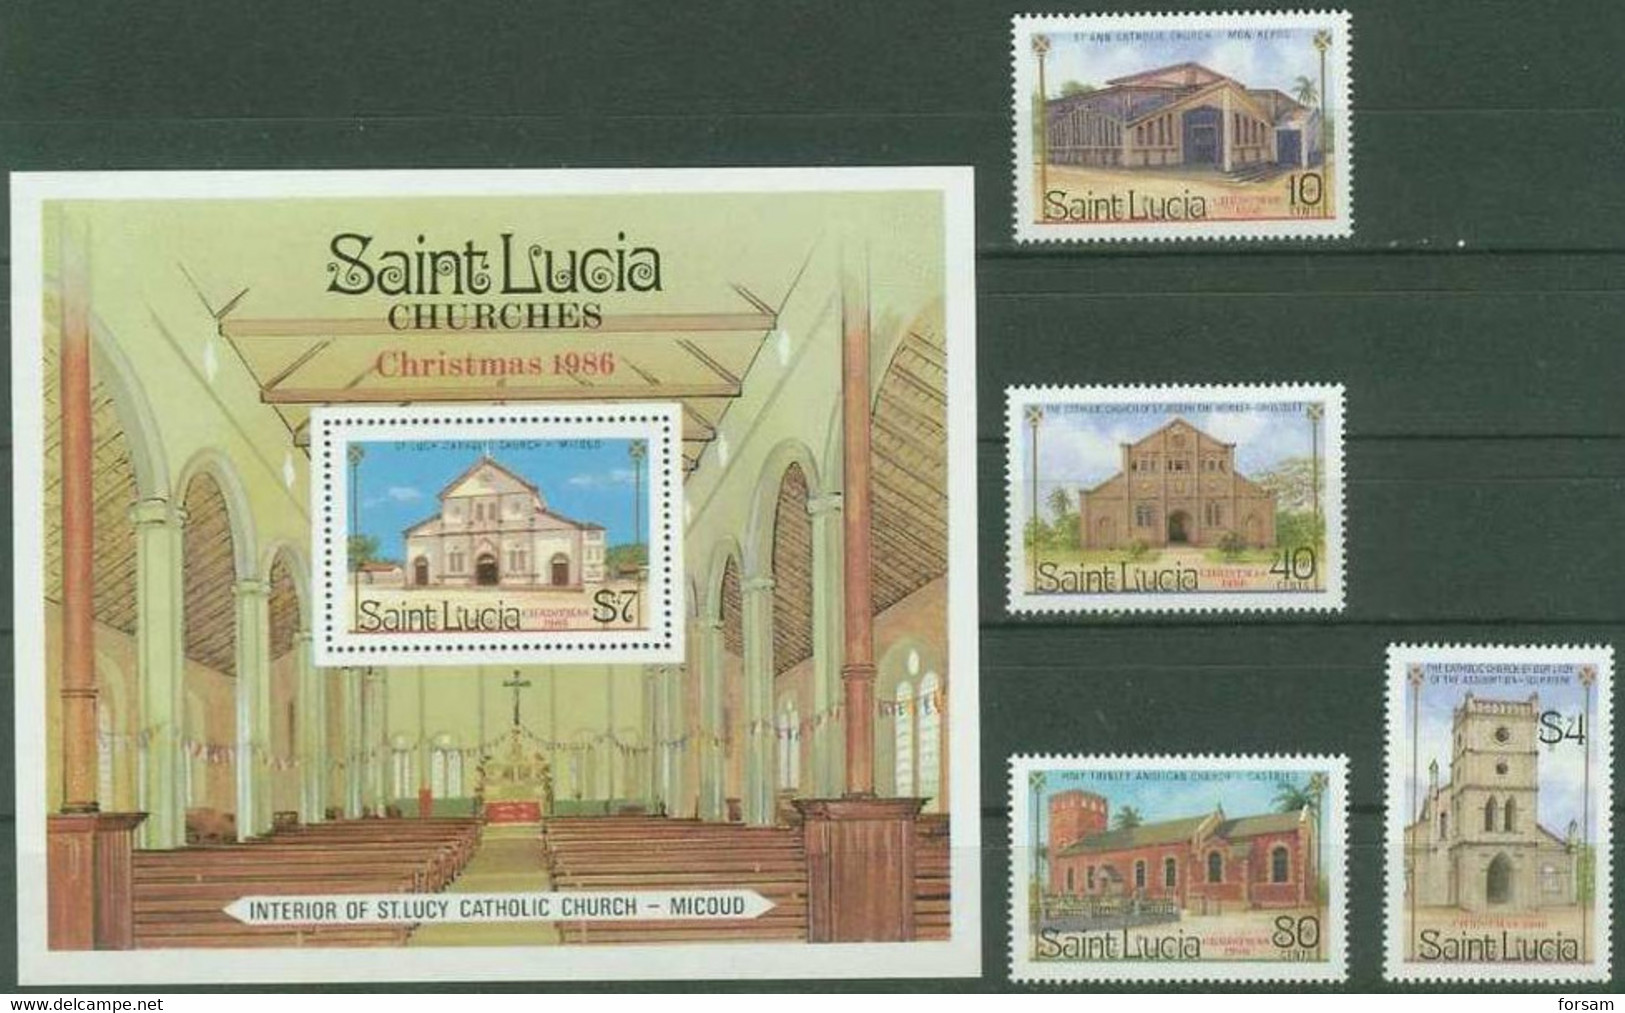 St.LUSIA..1986..Michel # 877-880+BLOCK 881...MNH. - St.Lucie (1979-...)